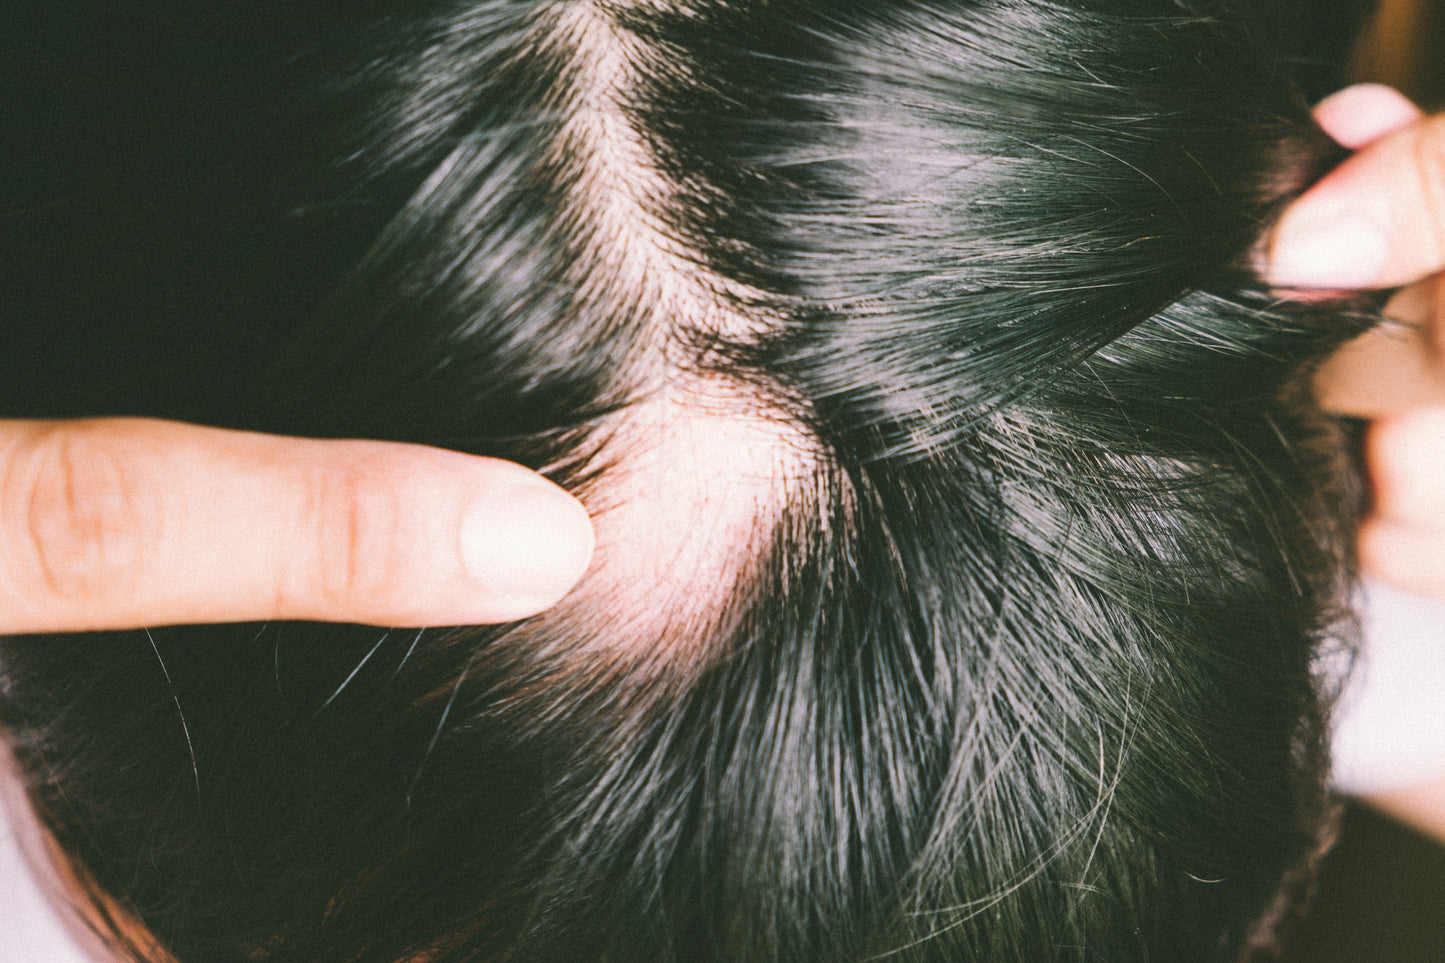 What Are Signs of Permanent Traction Alopecia?